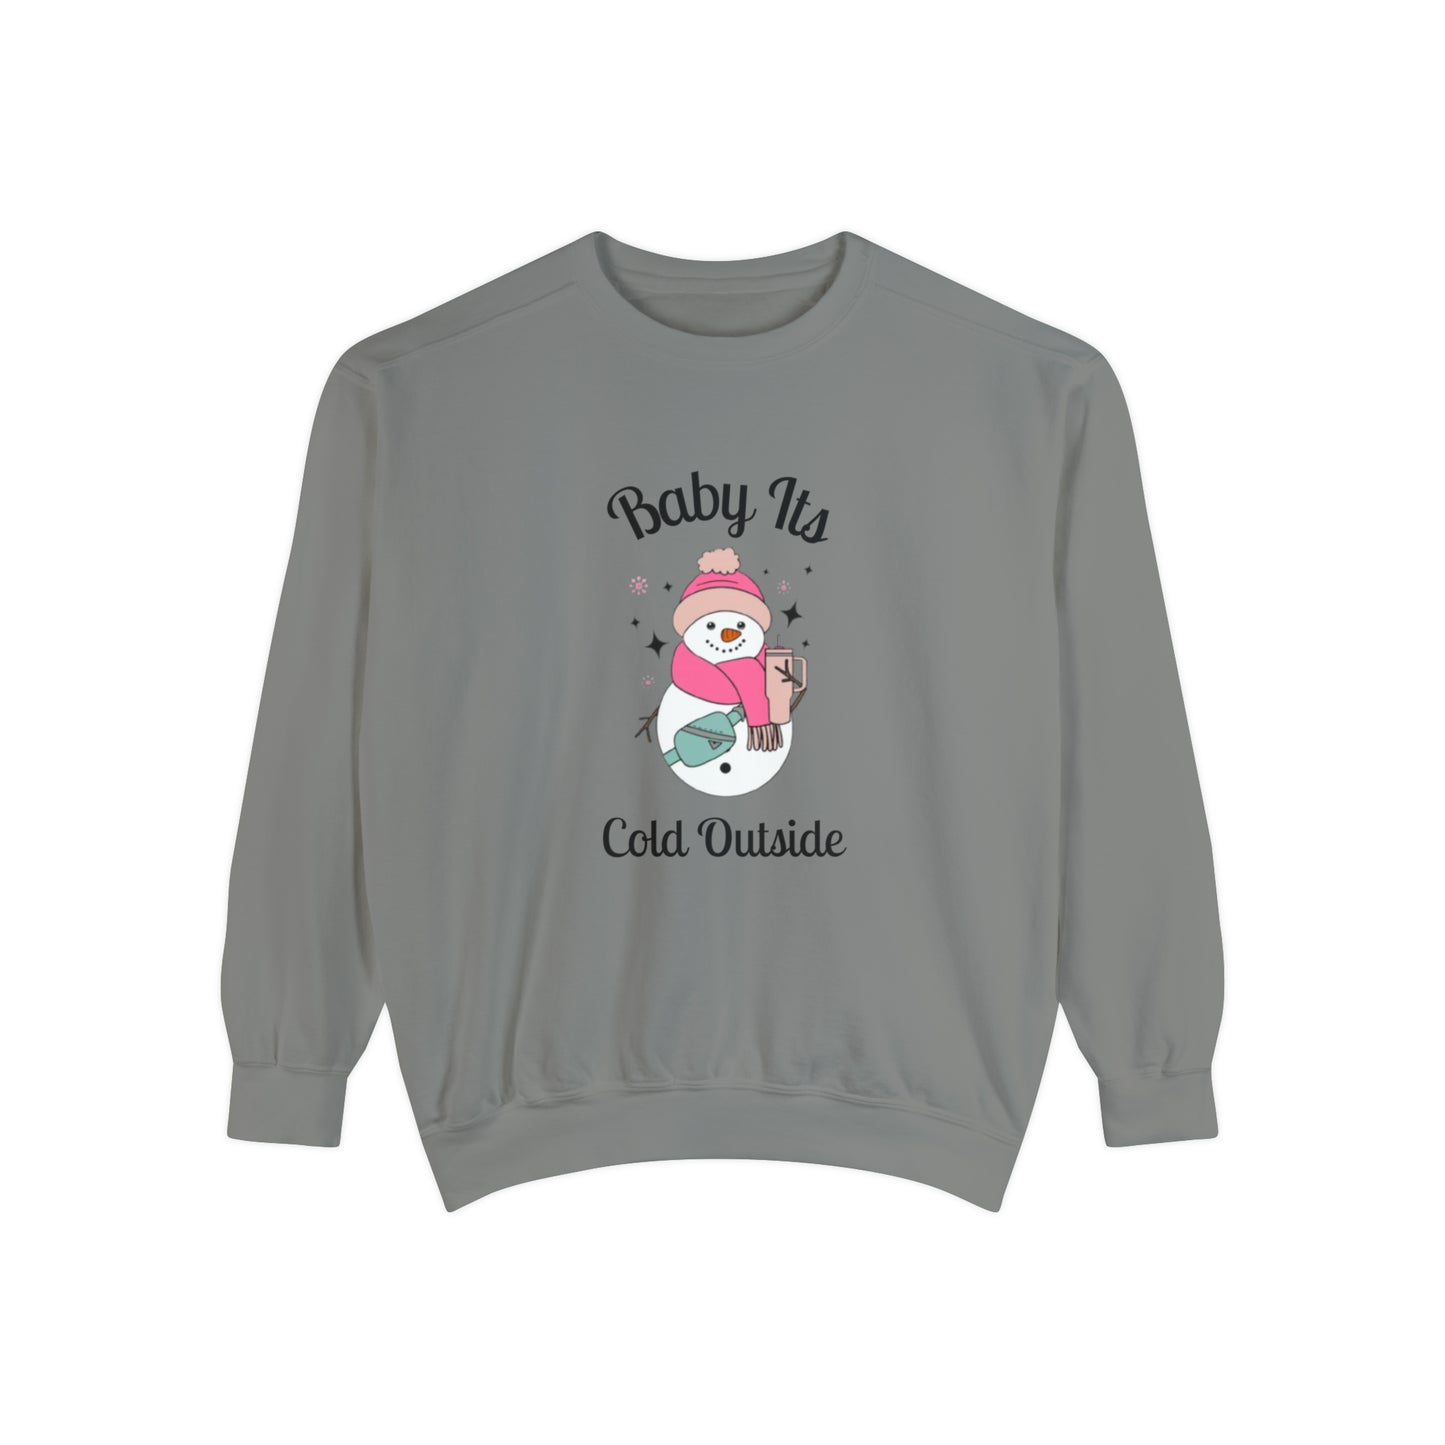 Baby Its Cold Outside Comfort Colors Unisex Garment-Dyed Sweatshirt